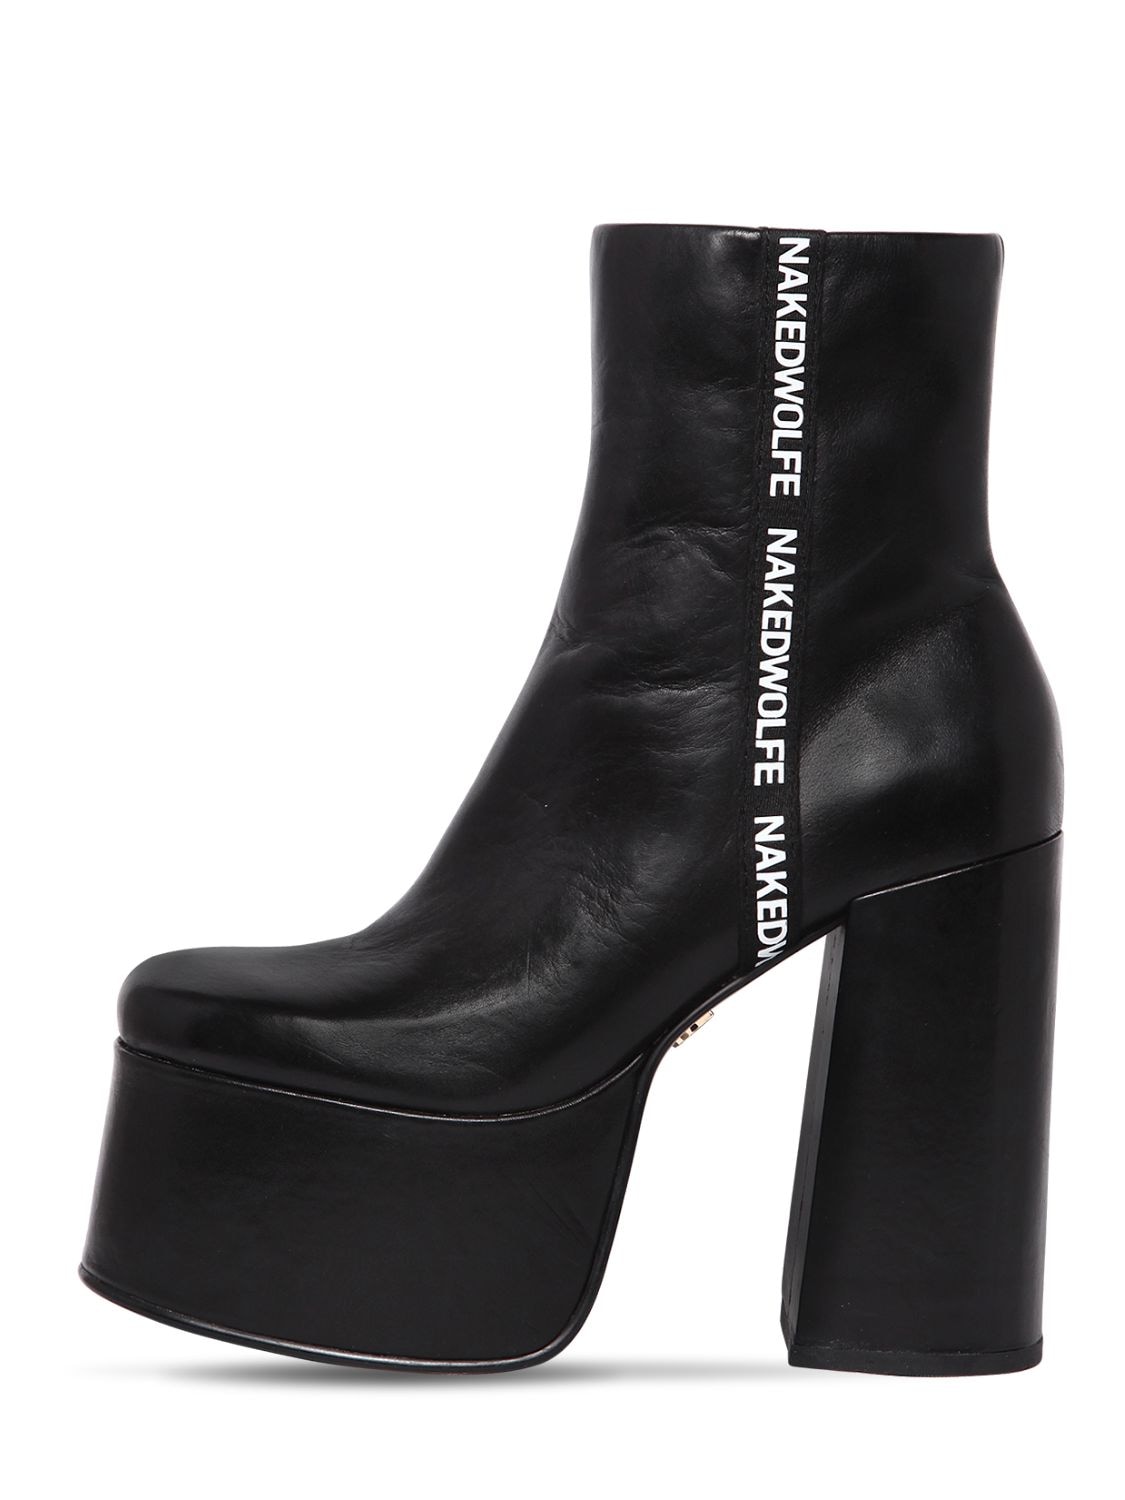 Naked Wolfe 130mm Posh Leather Platform Boots In Black